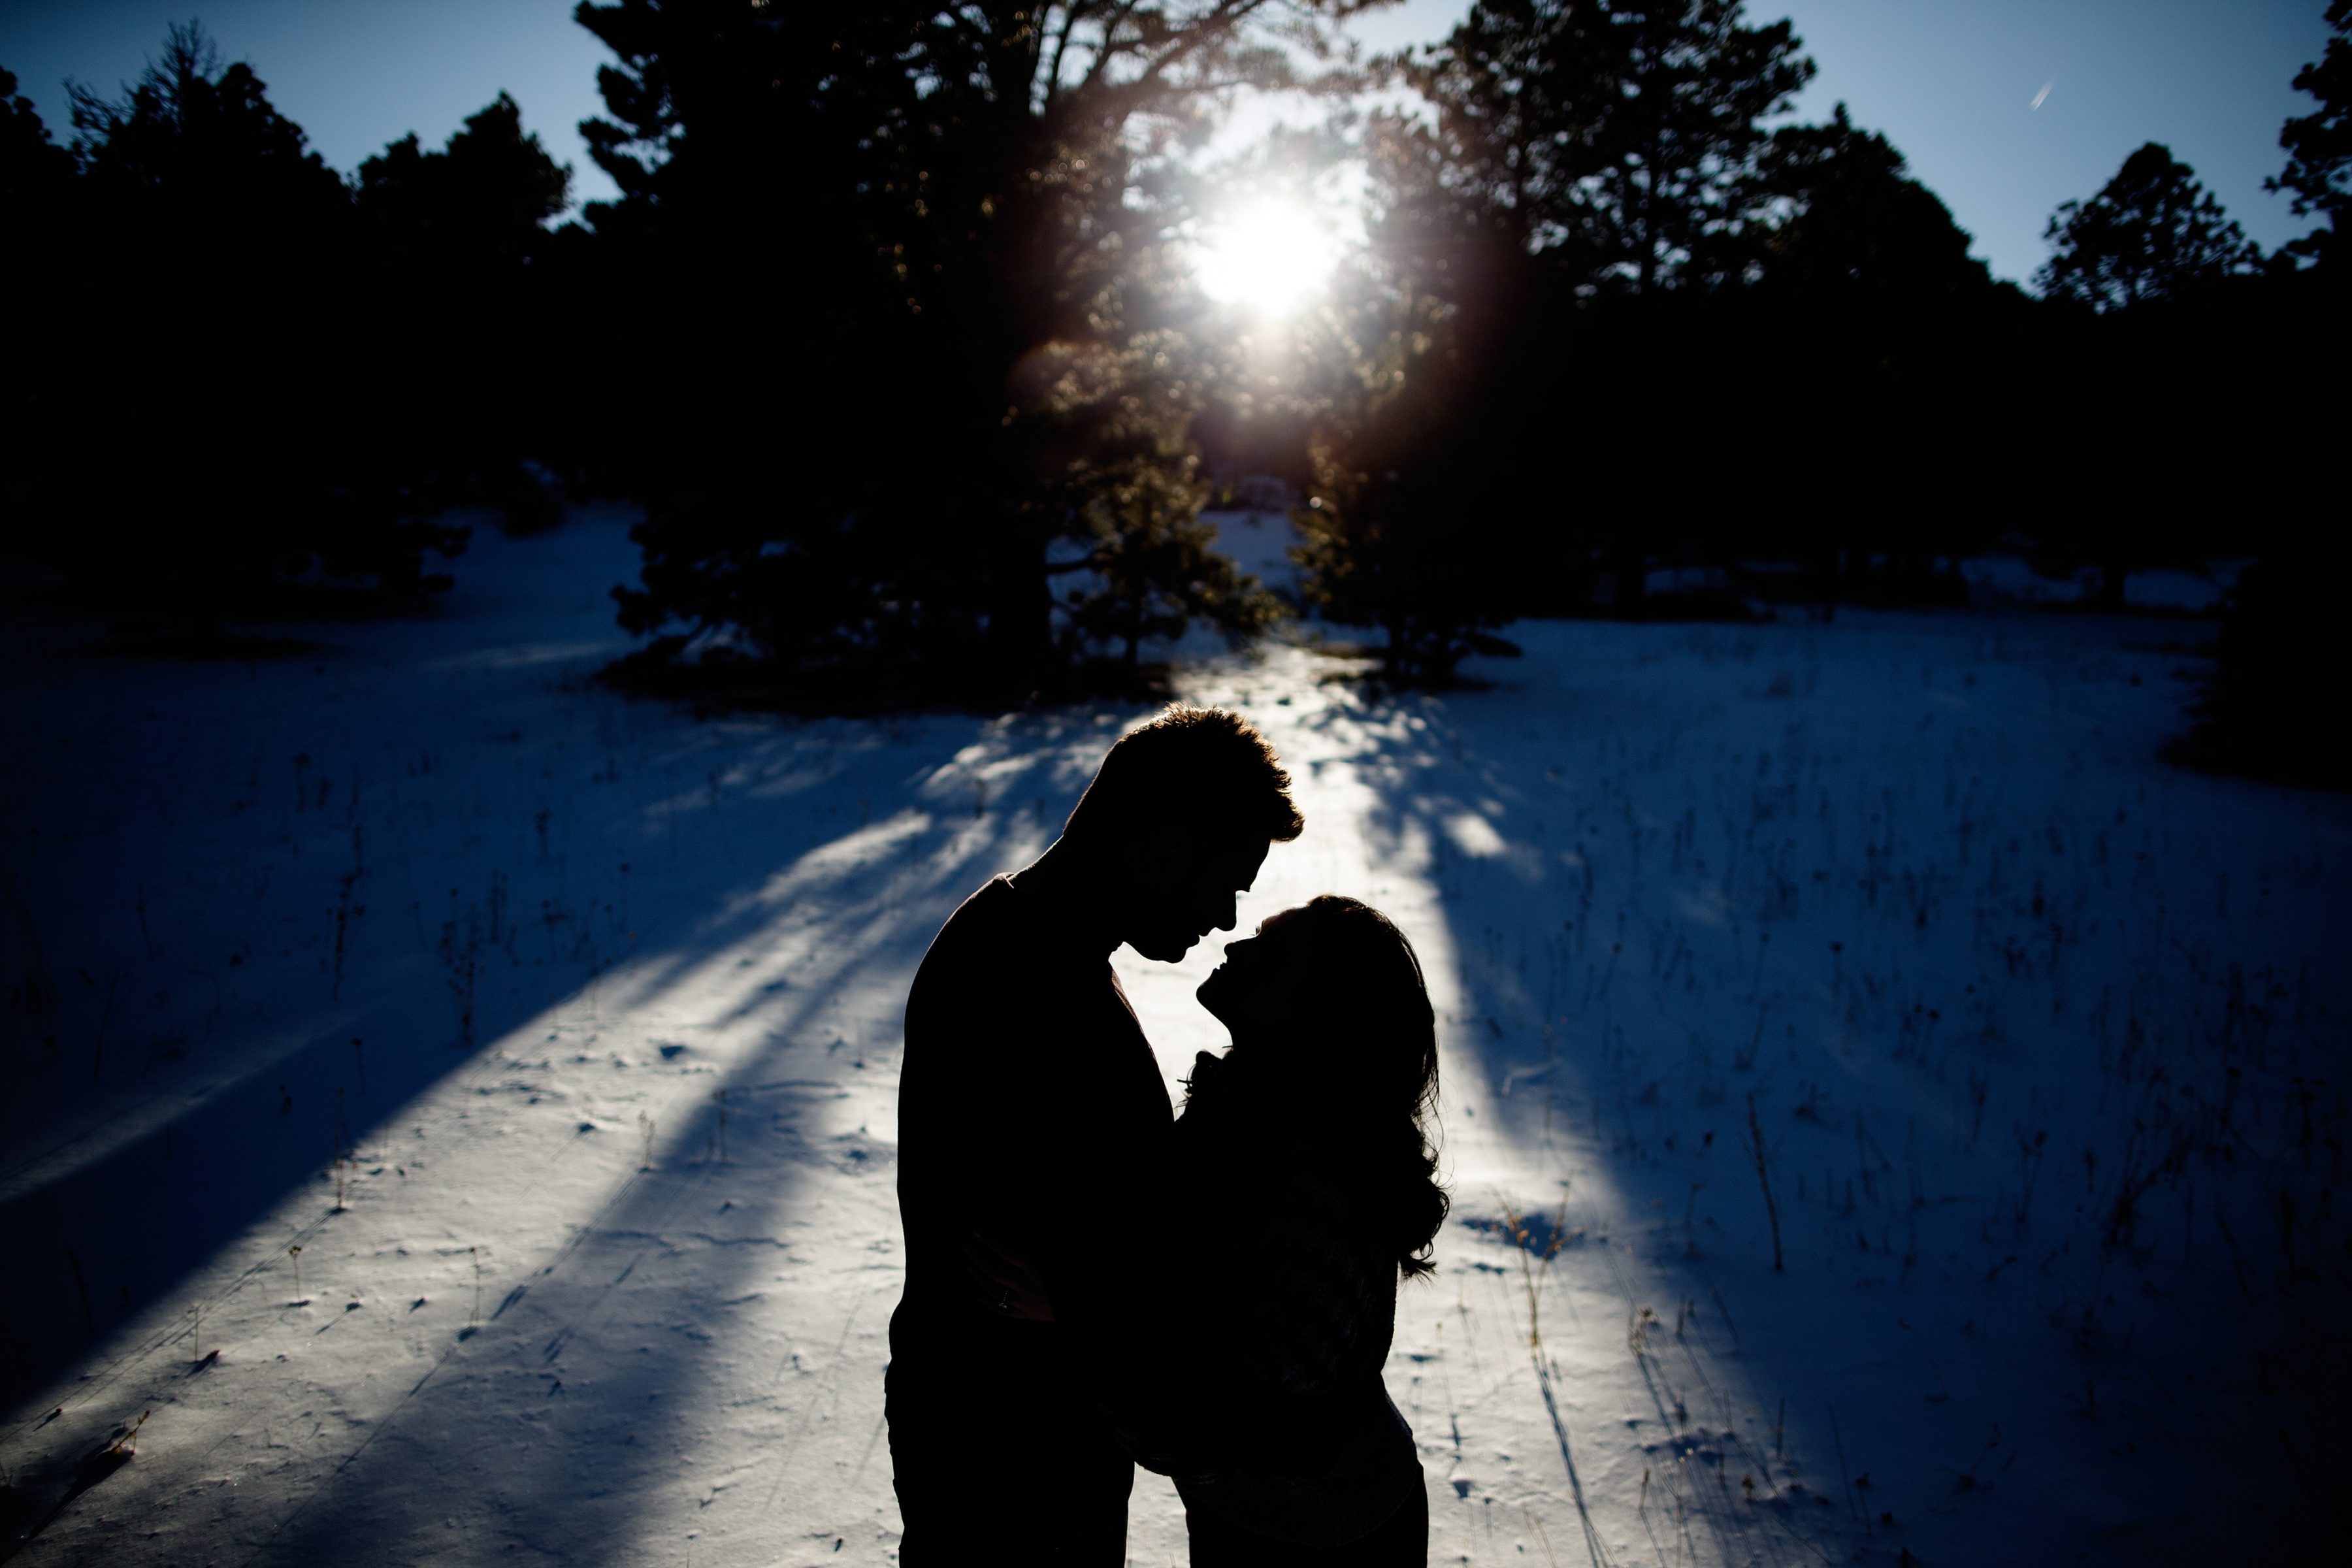 The sun casts shaddows in Elk Meadow Park as Melissa and Jordan pose together